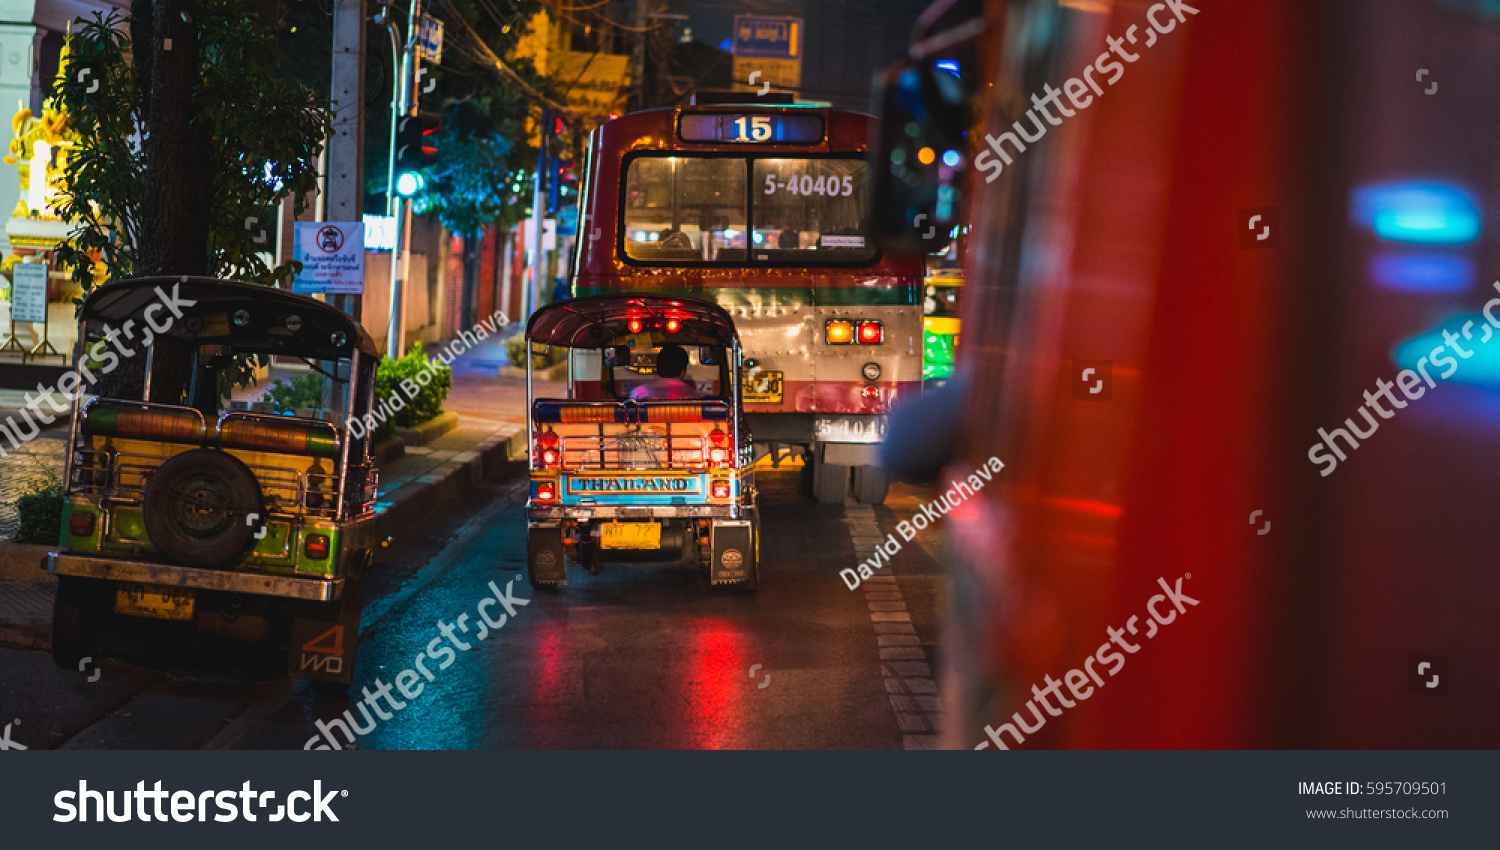 BANGKOK - FEBRUARY 18: Night ride a on public bus with tuk-tuks and a public bus view on February 18, 2017 in Bangkok, Thailand. #595709501